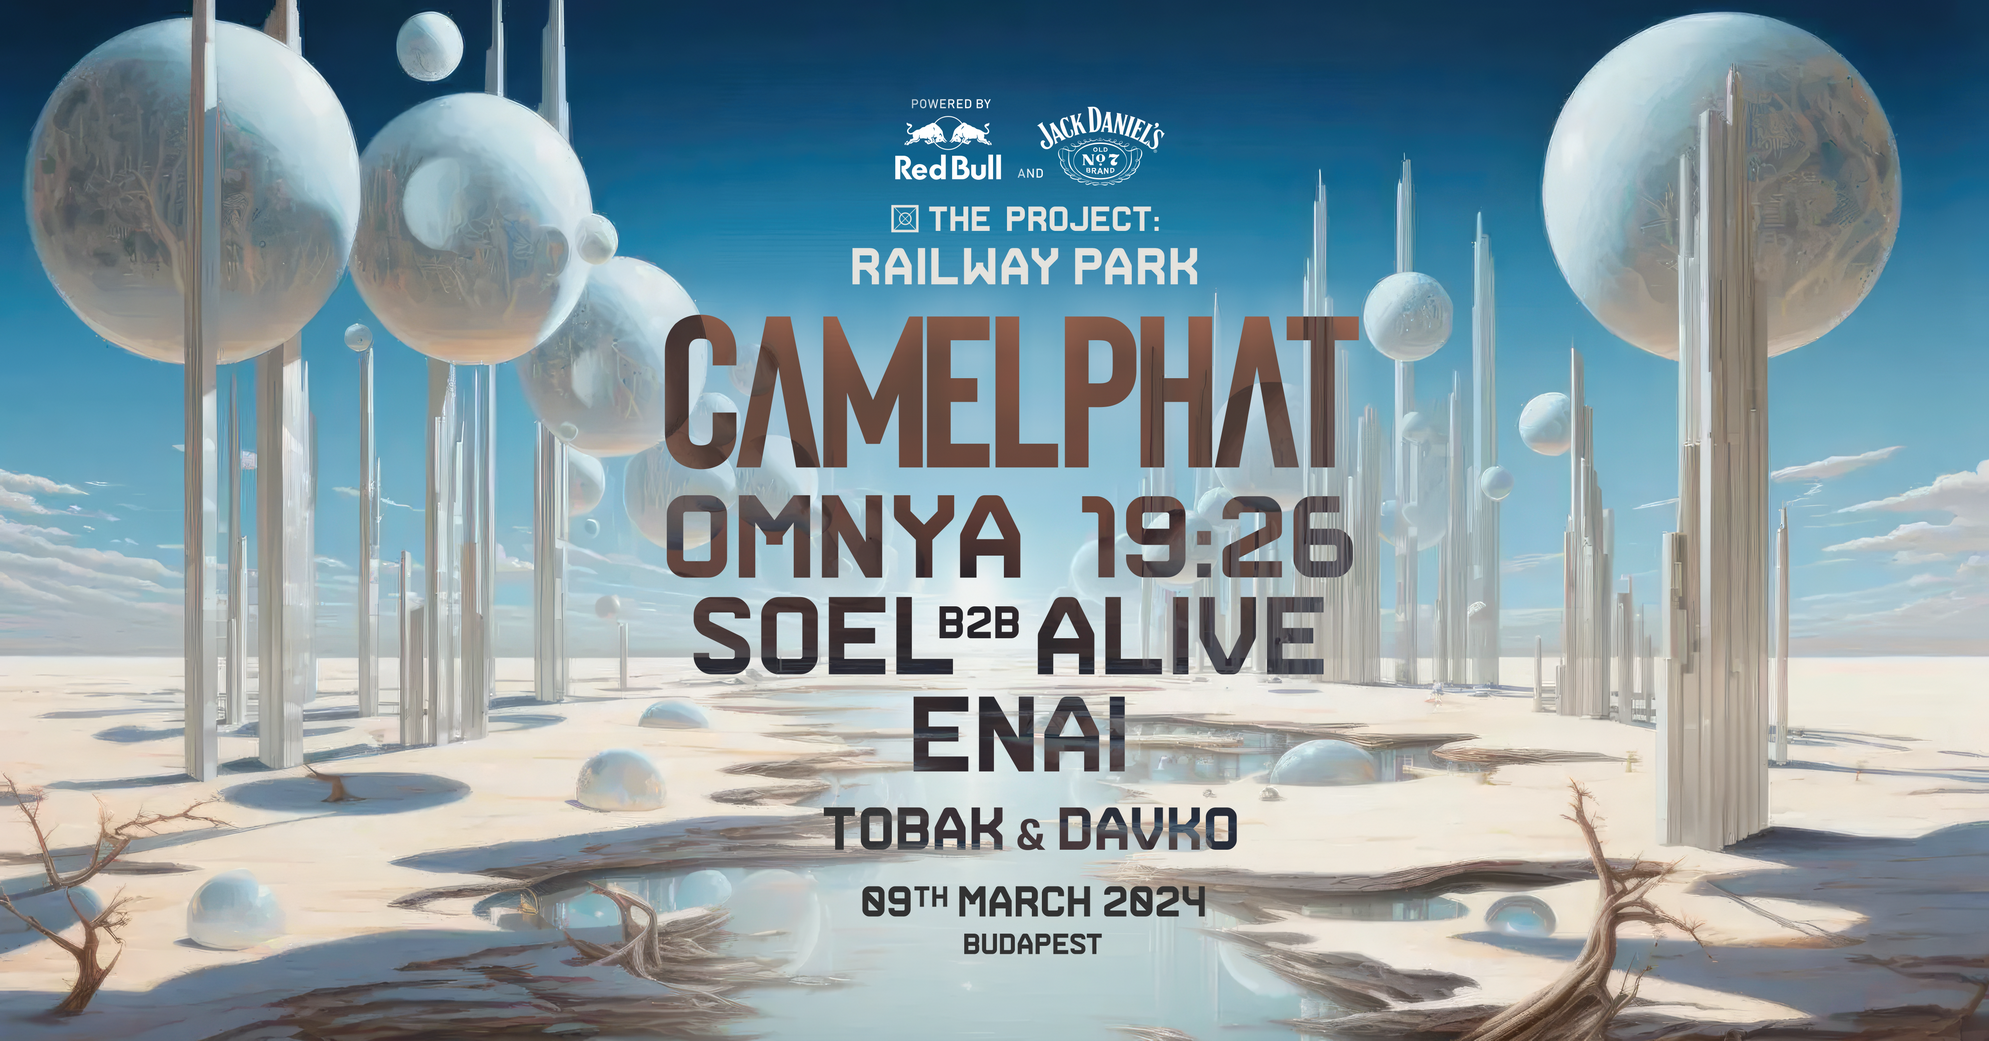 The Project: Railway Park with CamelPhat - フライヤー表